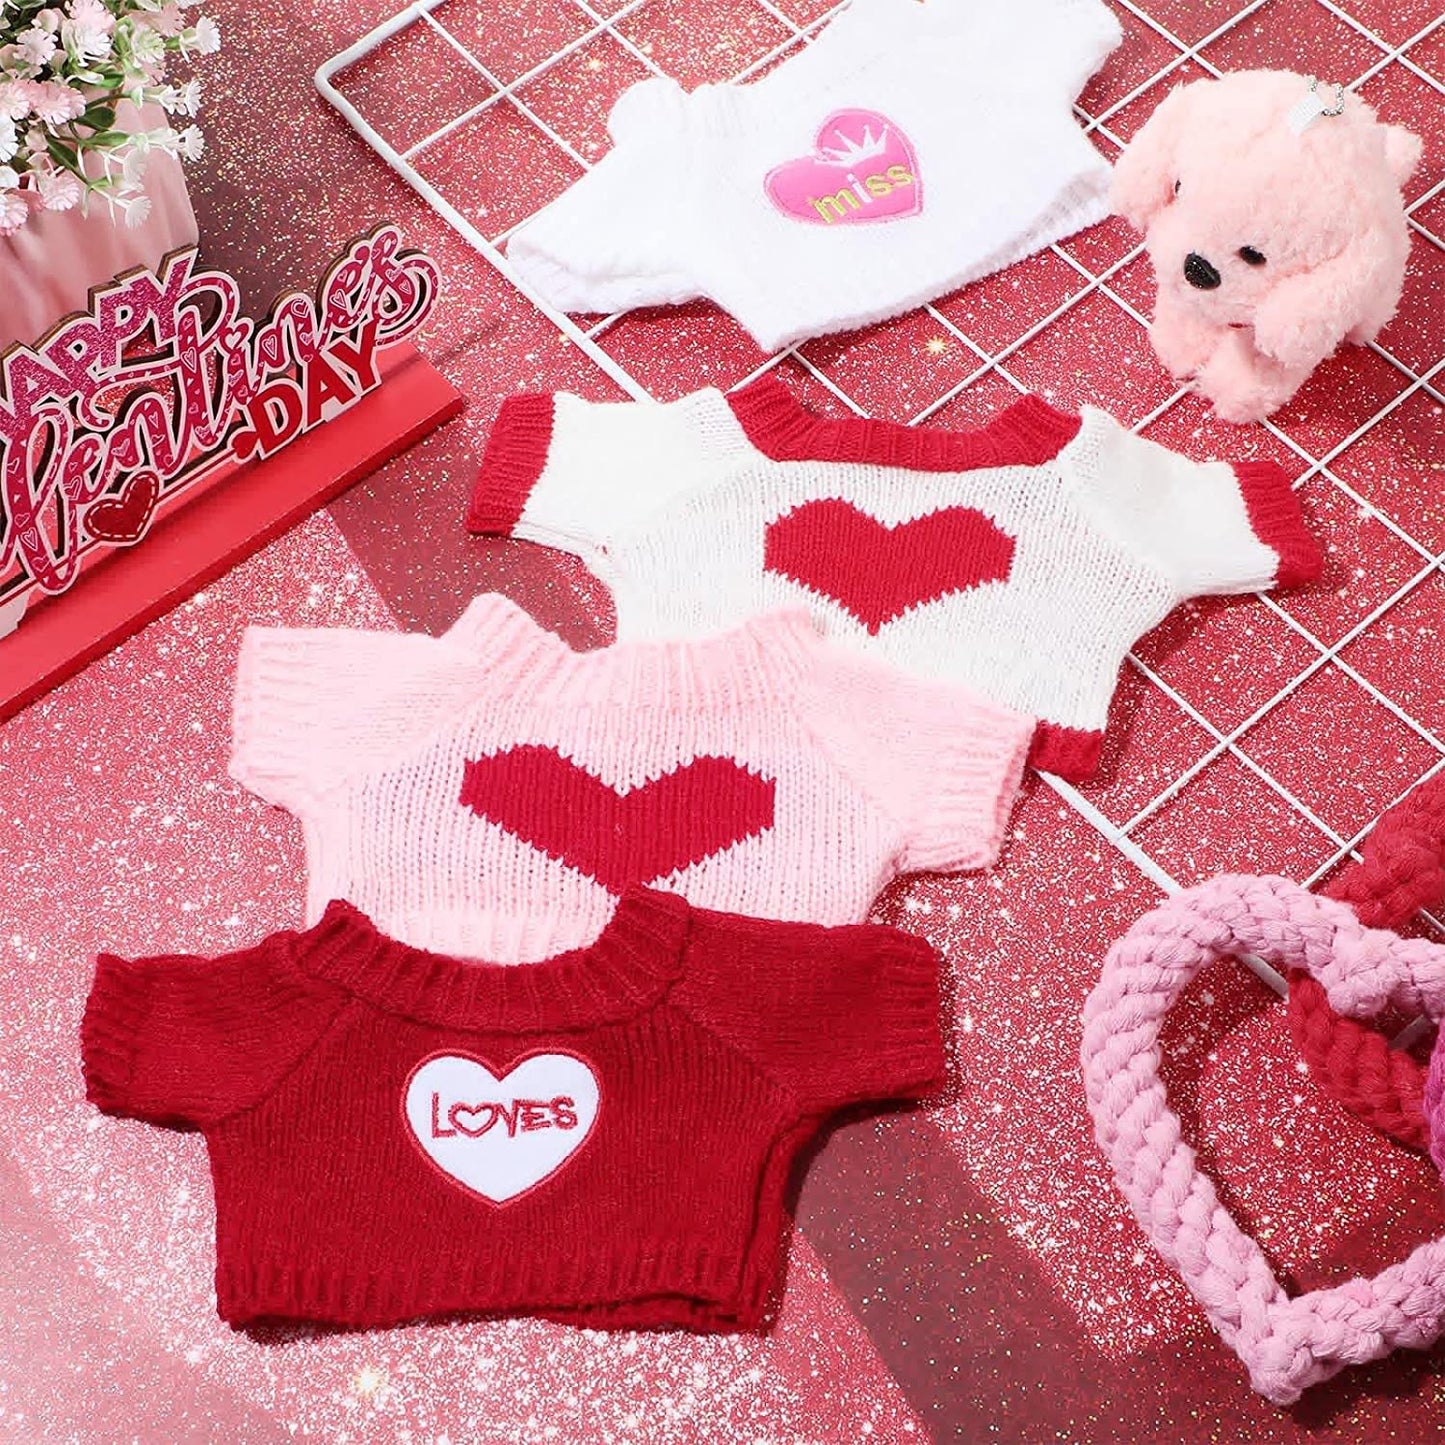 4 Pcs Ferret Clothes Hamster Sweater Guinea Pig Clothes Bunny Costume Knitted Sweatshirt for Warm Winter Valentine Christmas Vest Clothing Ferret Accessories Kit Small Animal Outfit (Heart Style) Animals & Pet Supplies > Pet Supplies > Dog Supplies > Dog Apparel Mixweer   